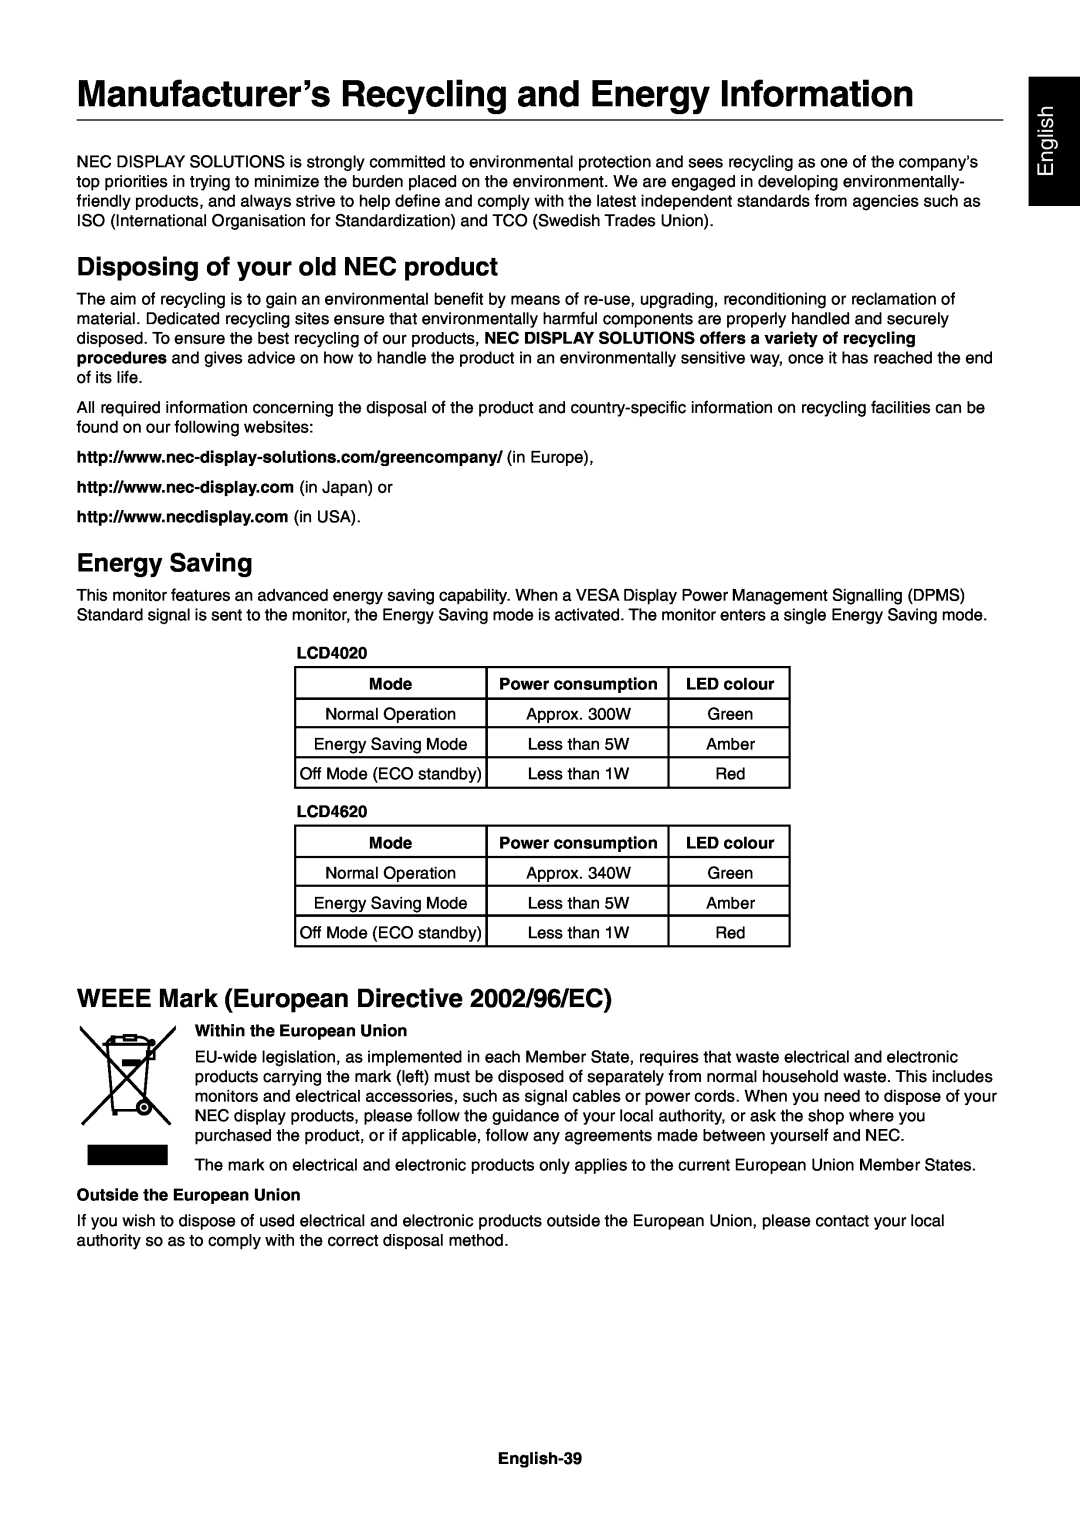 NEC LCD4620 Manufacturer’s Recycling and Energy Information, Energy Saving, WEEE Mark European Directive 2002/96/EC 